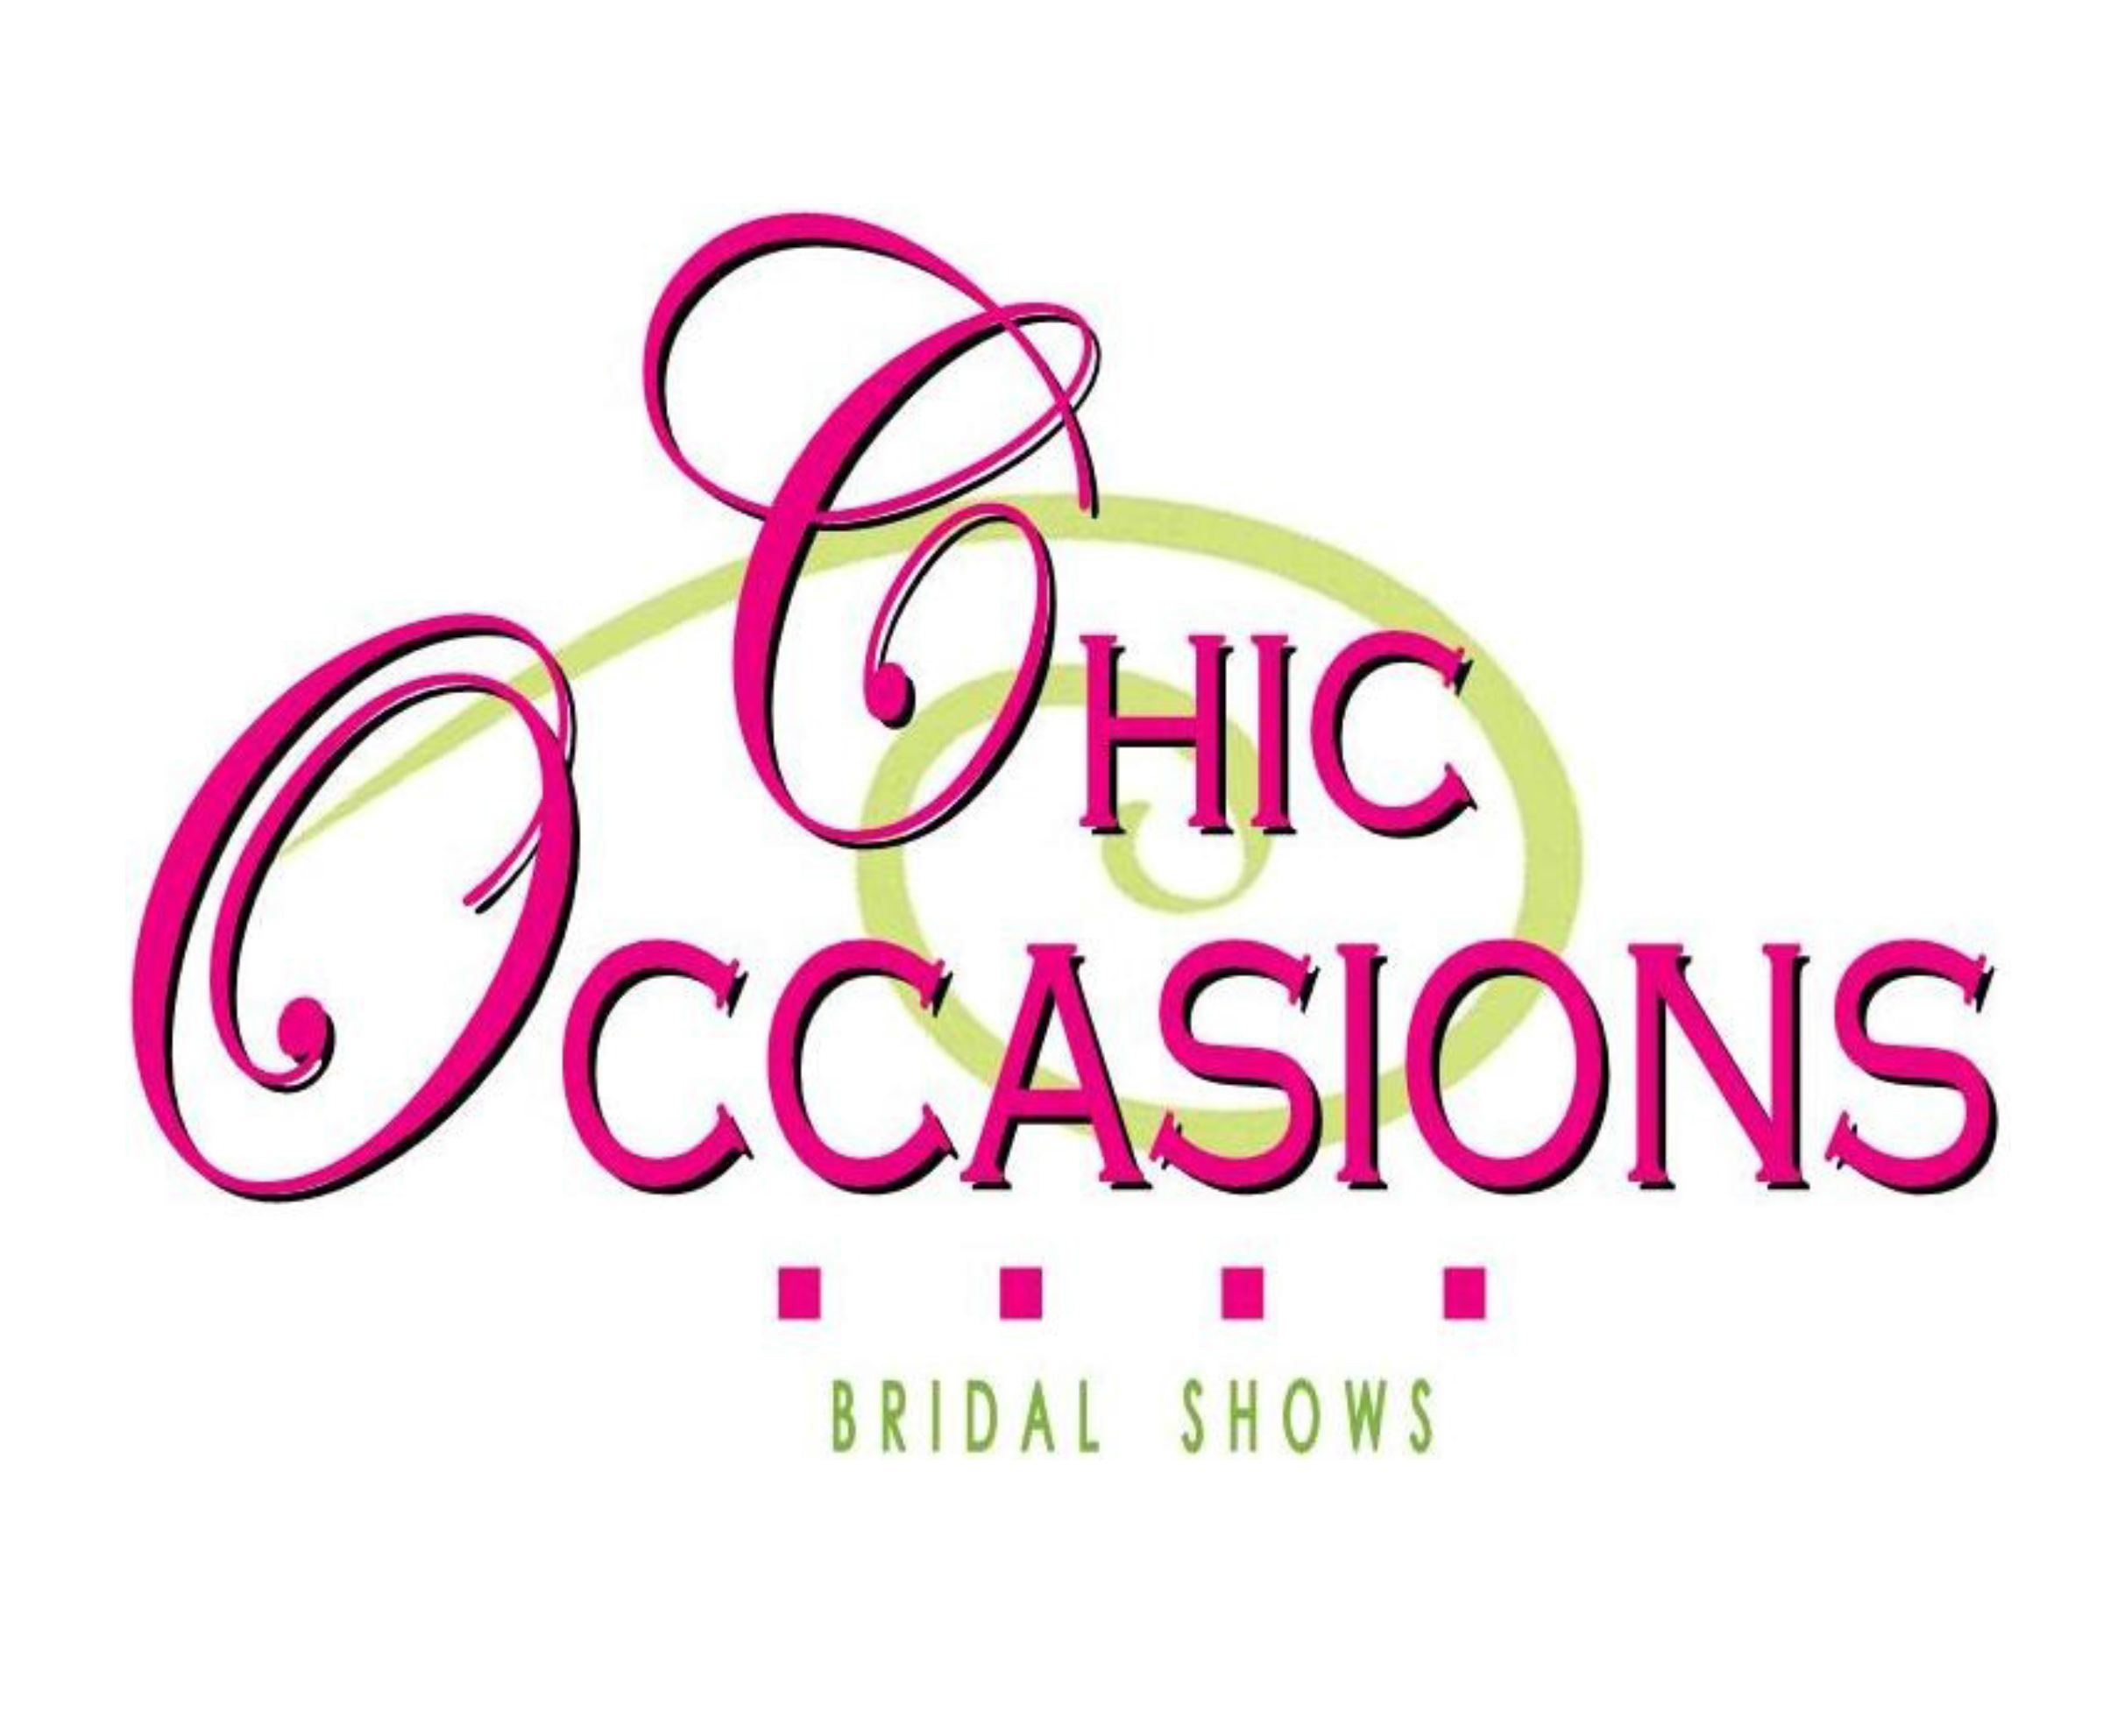 Chic Occasions Bridal Show